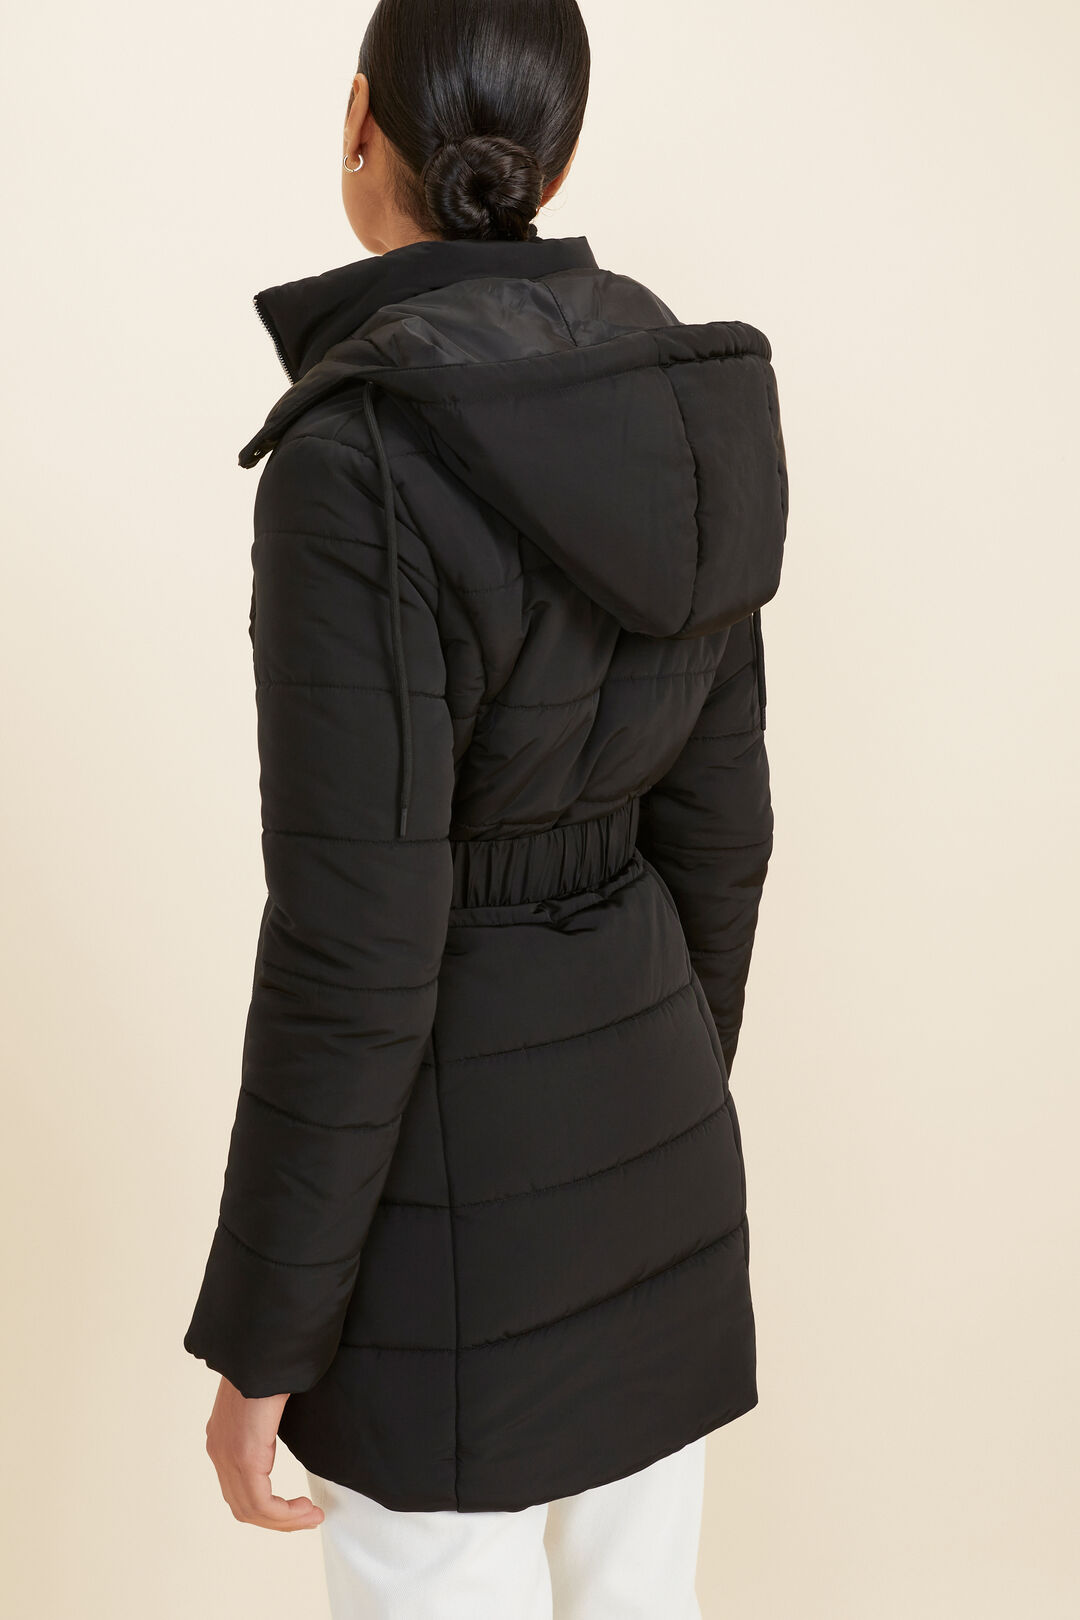 Fitted Mid Length Puffer   Black  hi-res